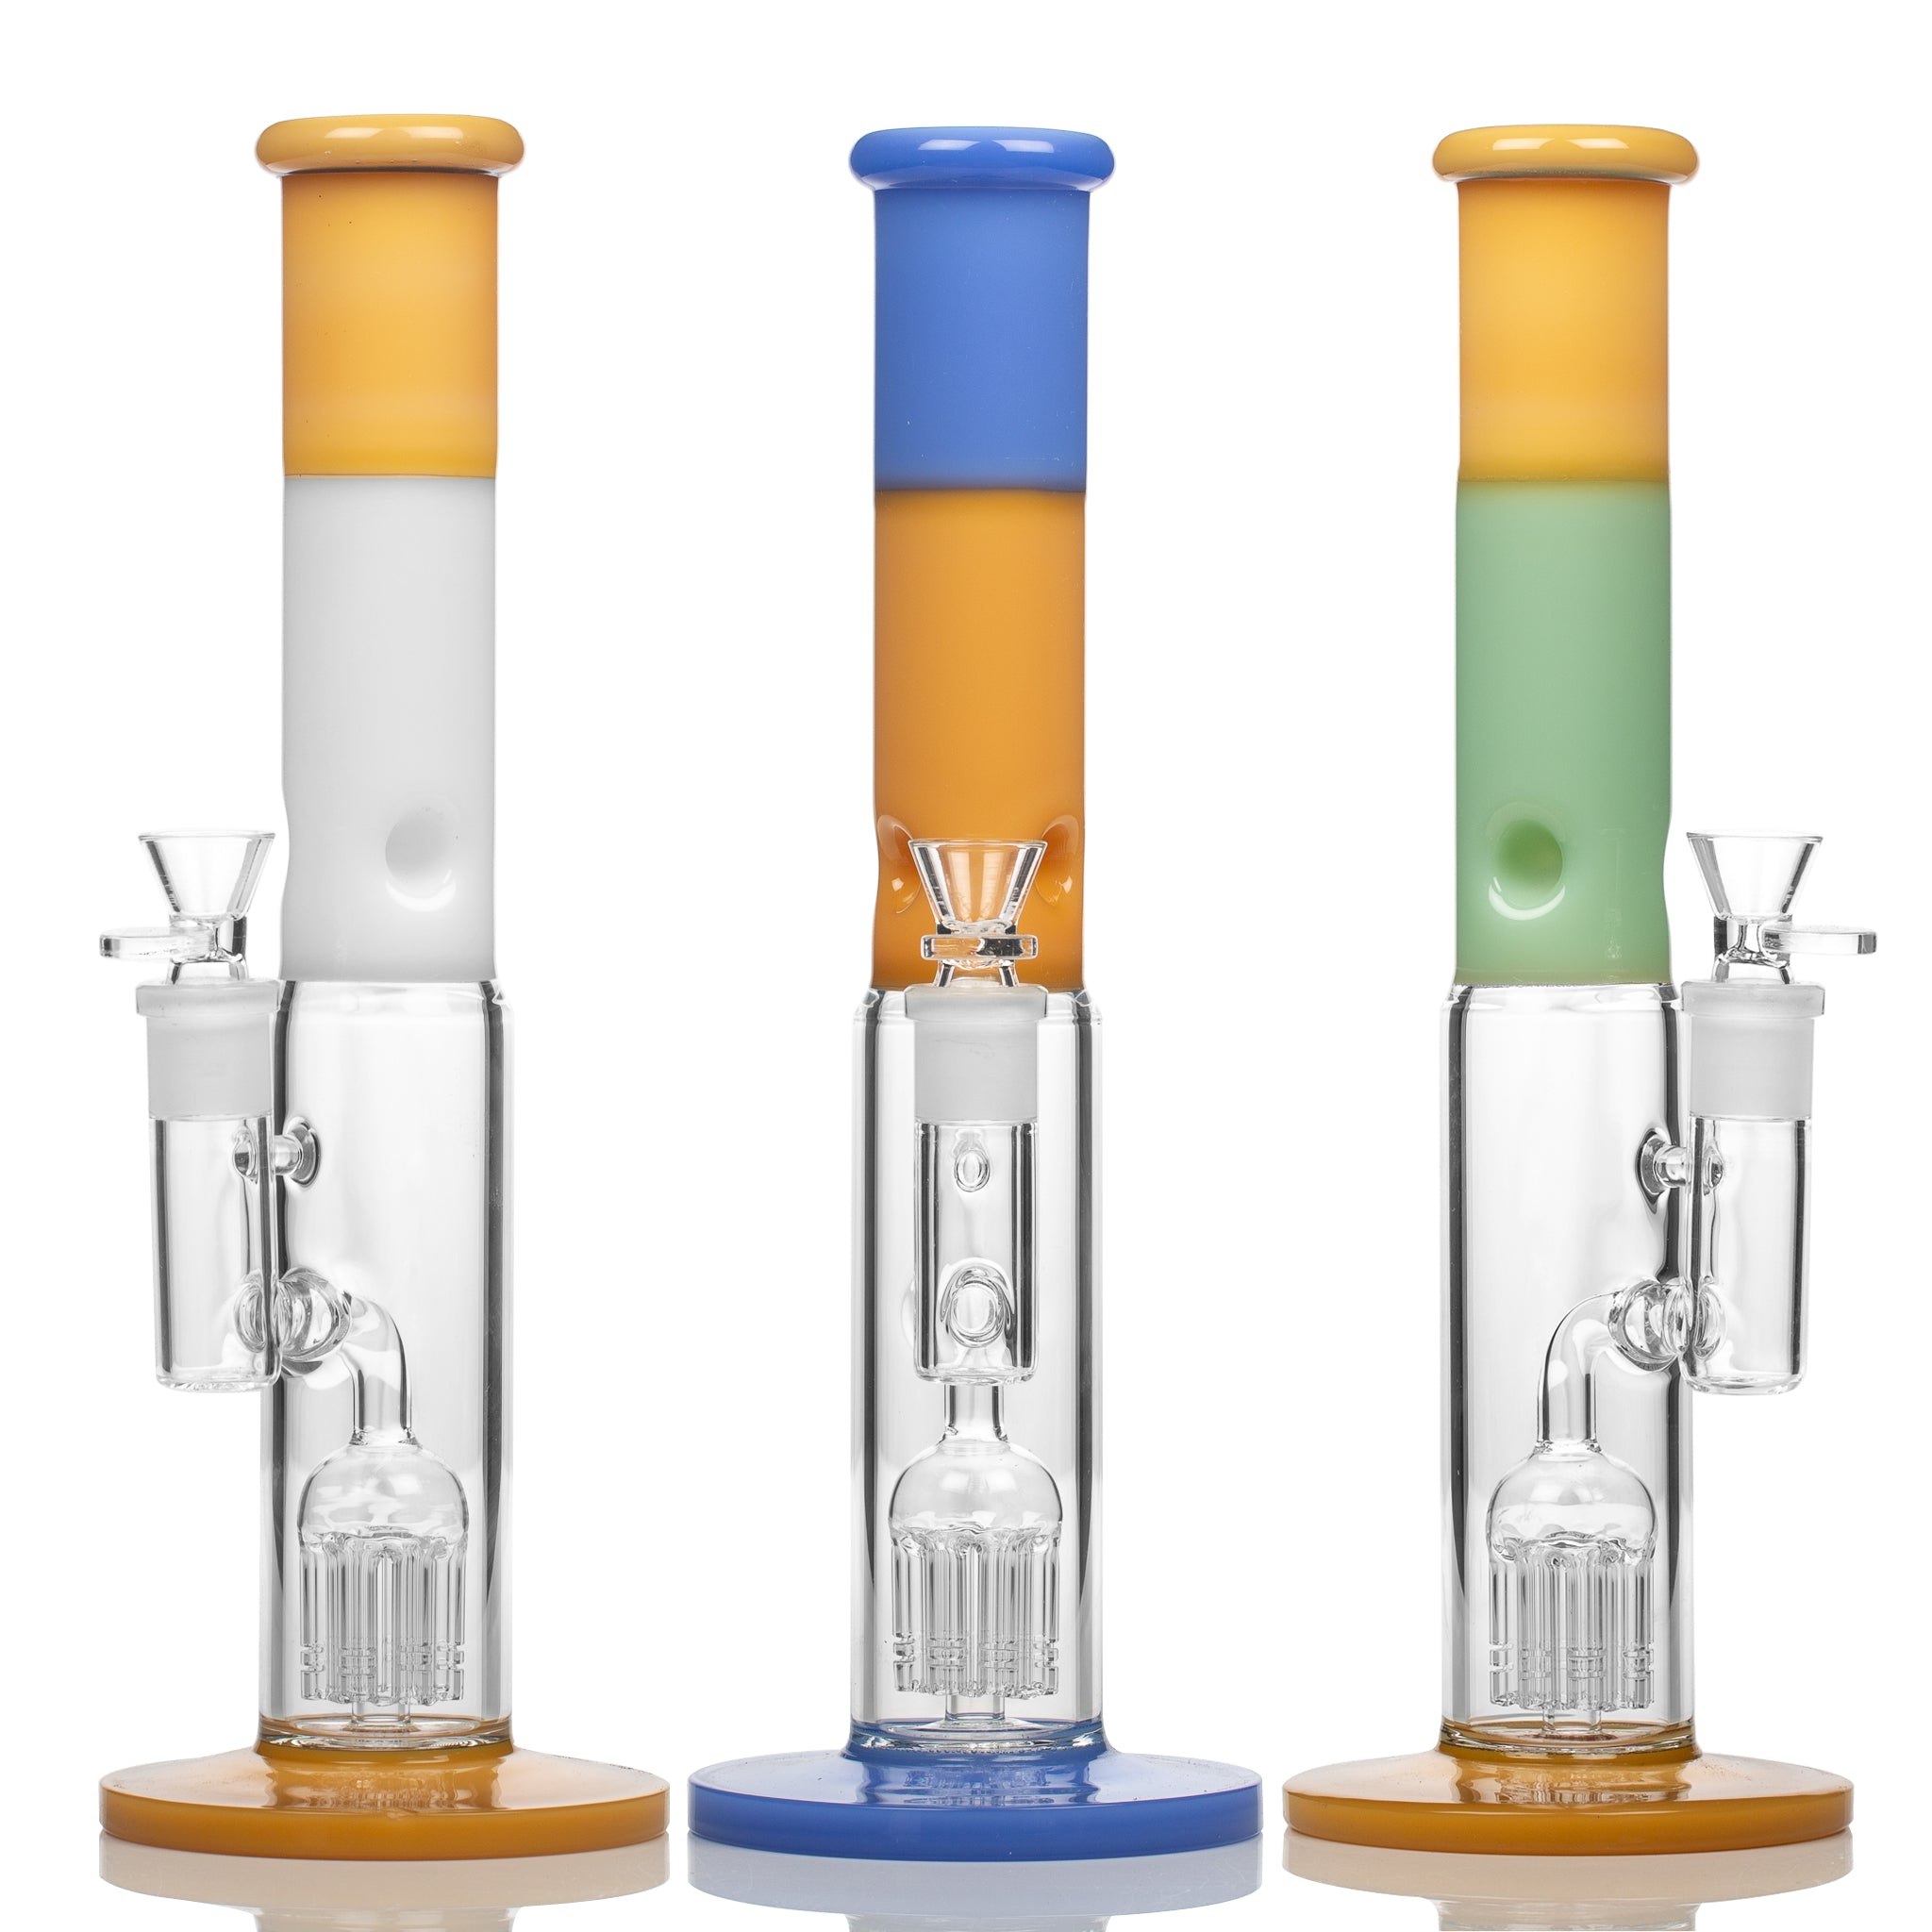 3 different colours of 30cm tall glass bongs with 8 arm percolators for high diffusion of smoke for a smooth draw.